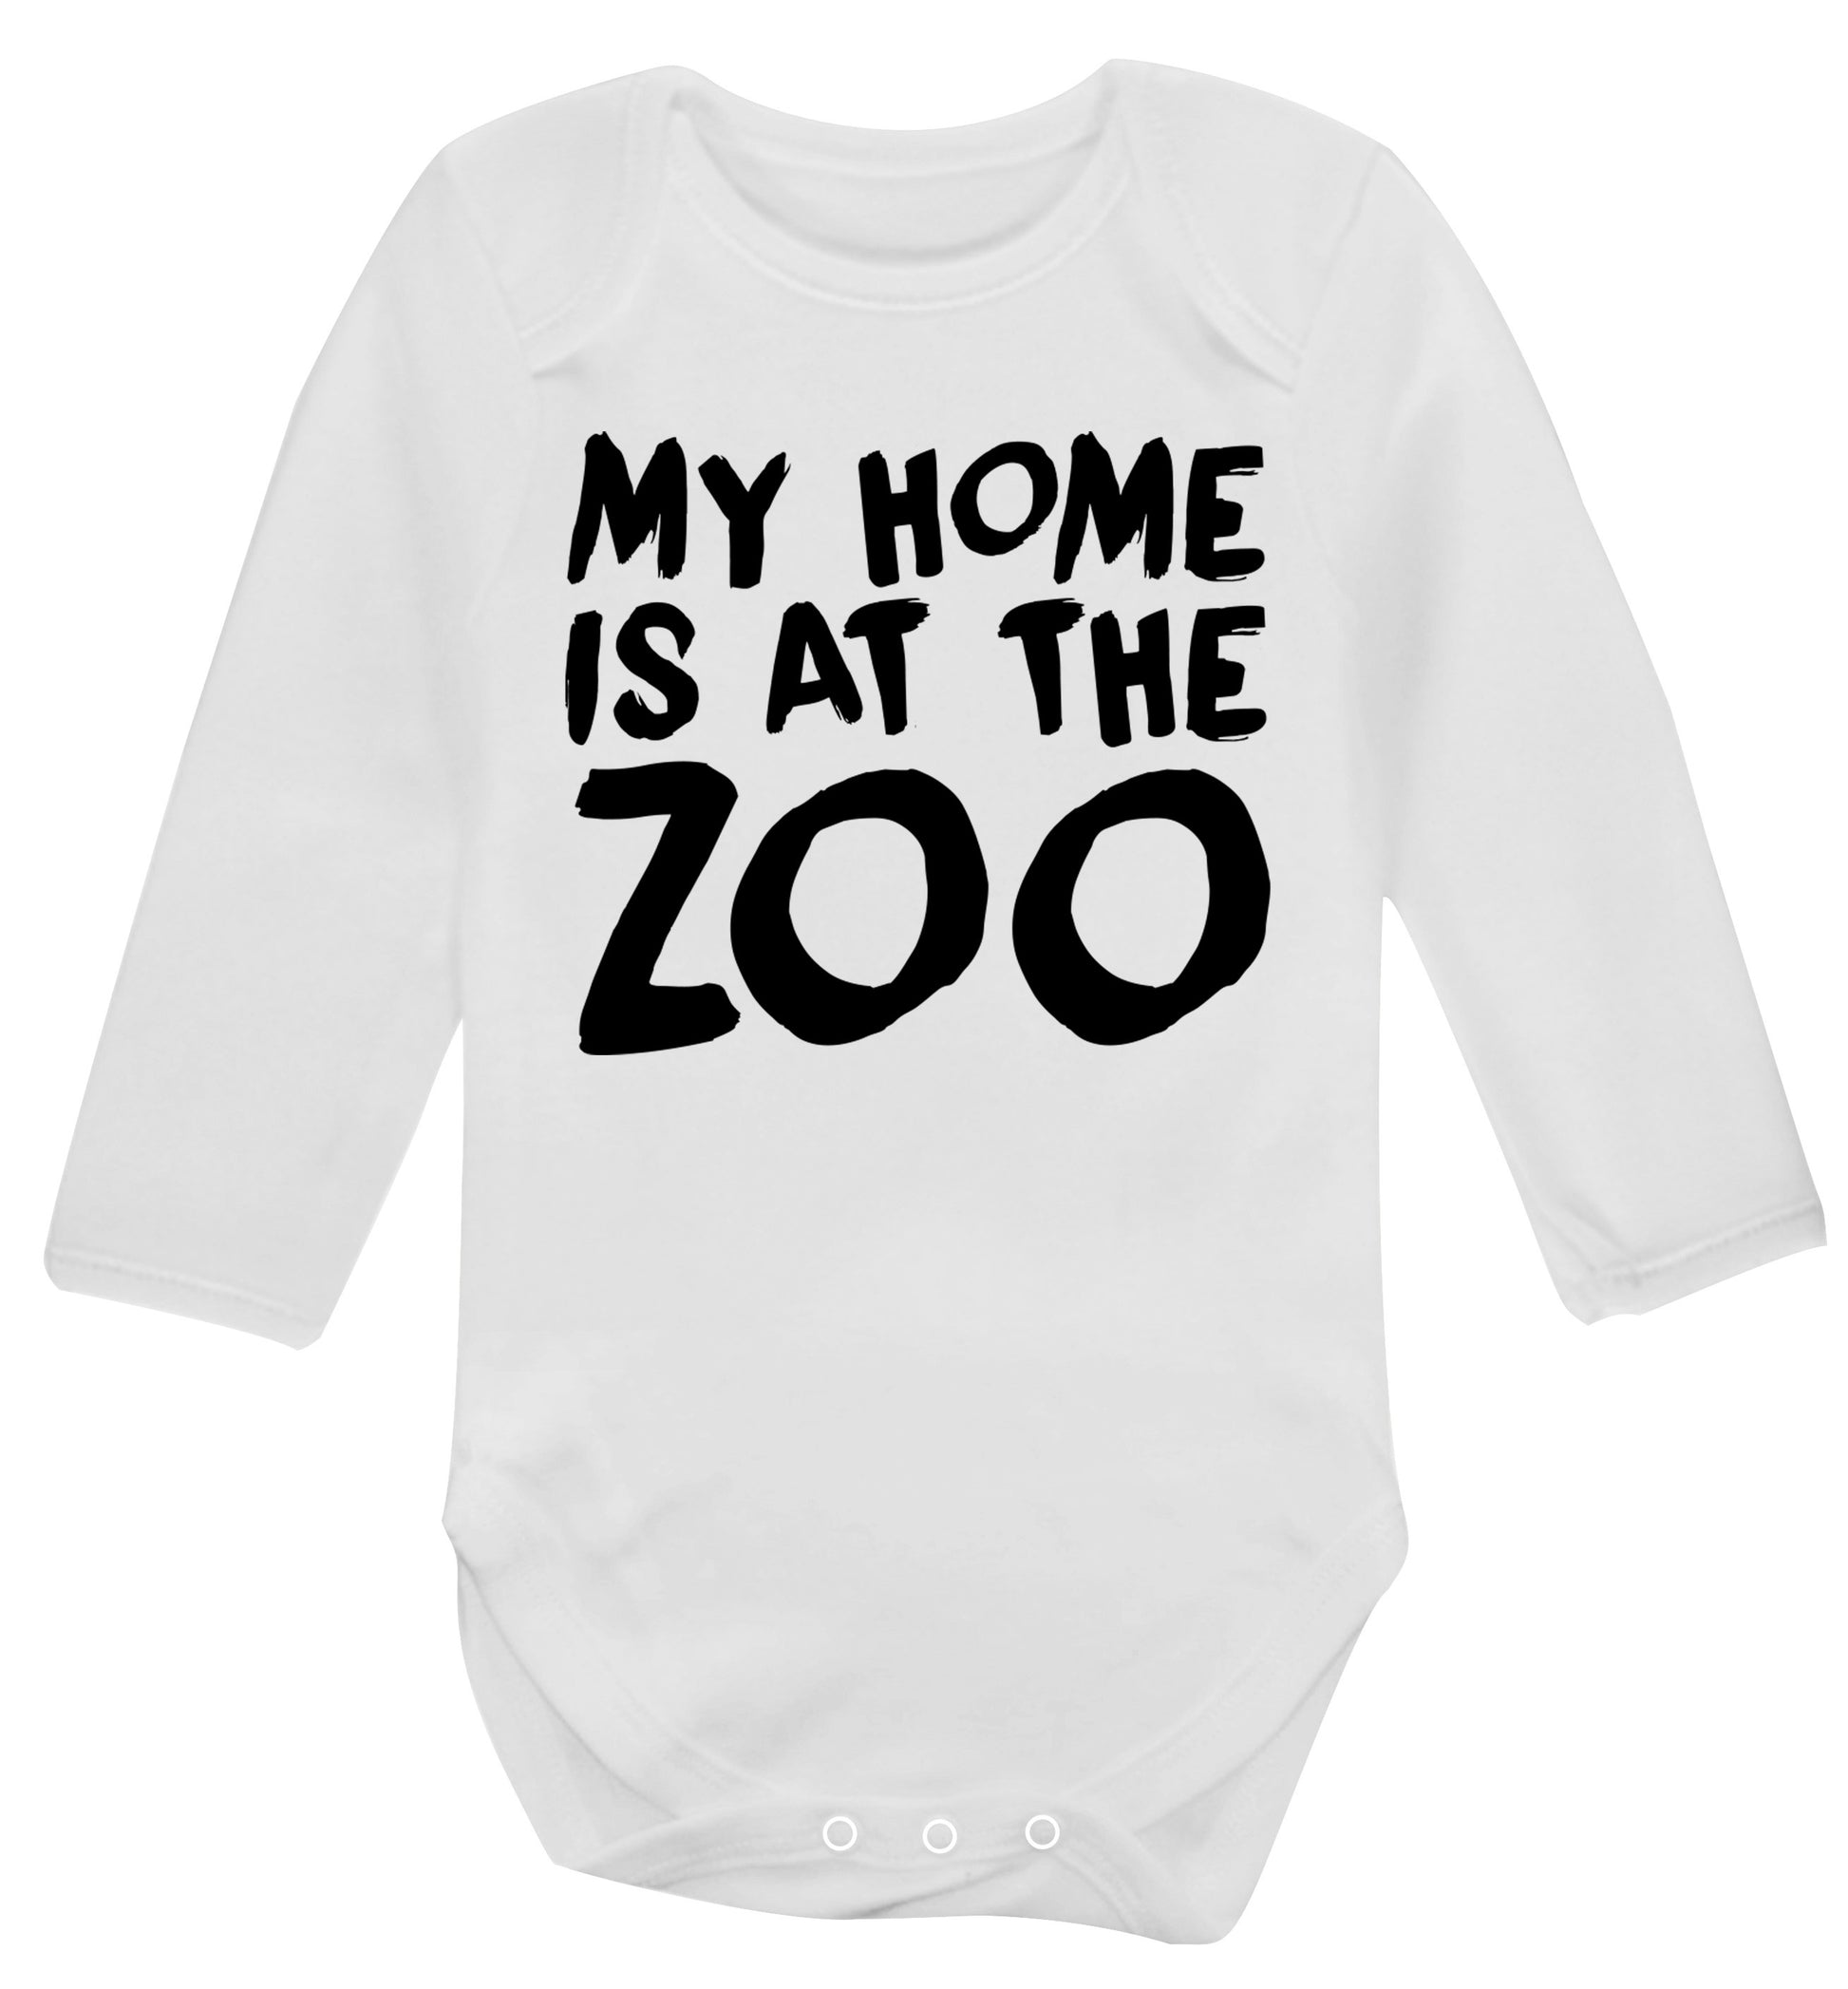 My home is at the zoo Baby Vest long sleeved white 6-12 months